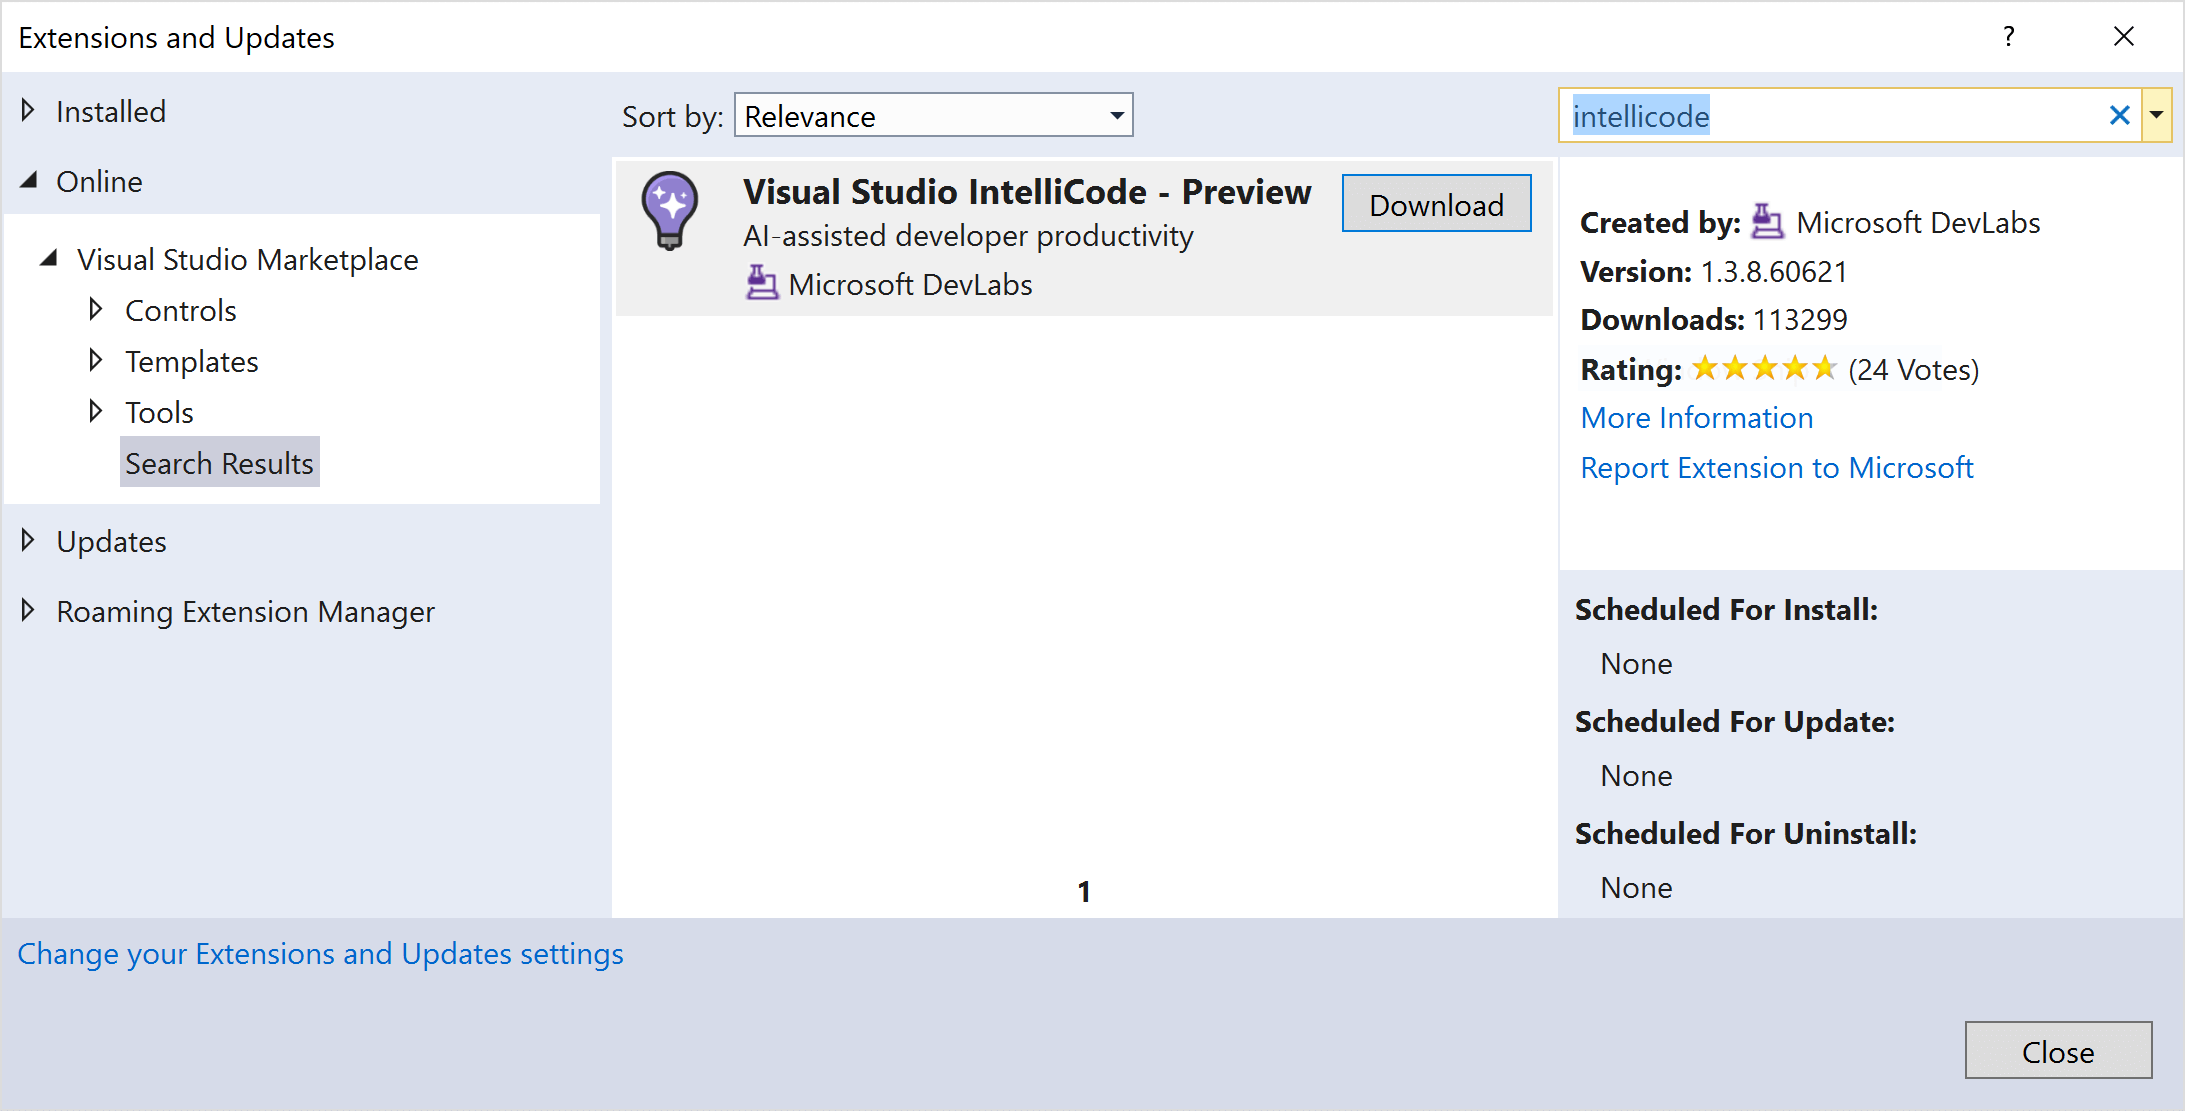 Download the extension from Visual Studio